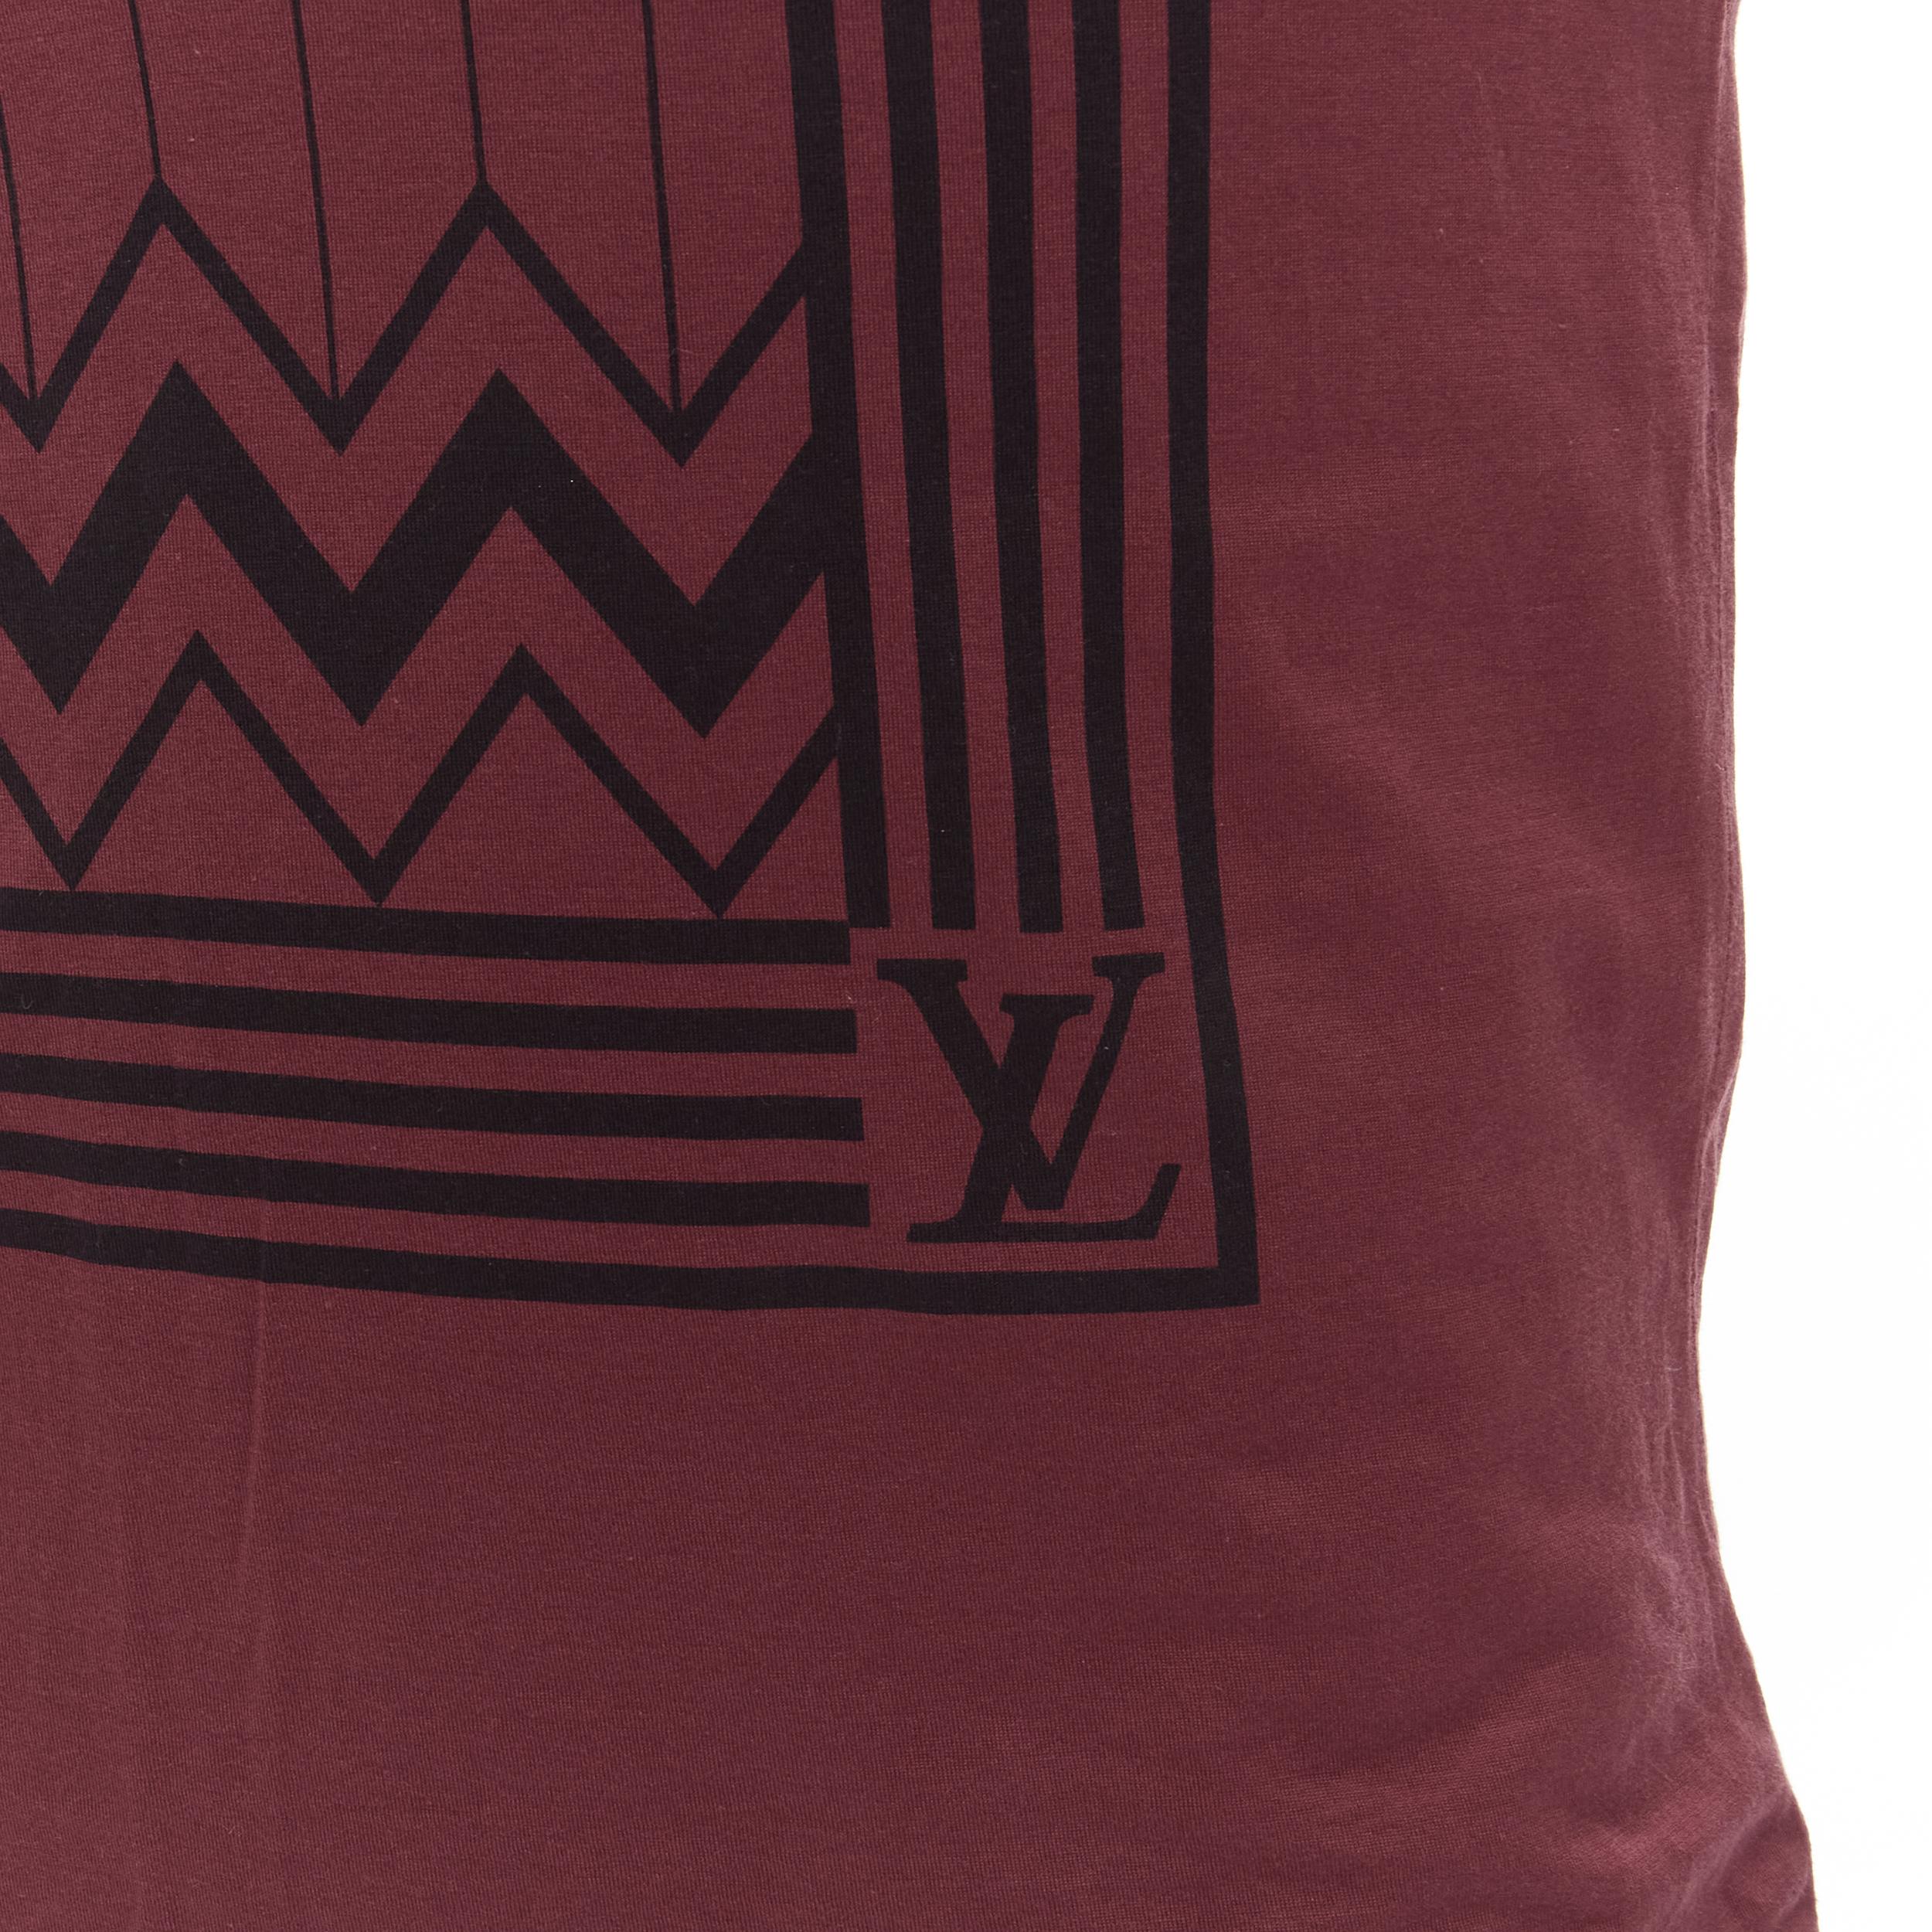 LOUIS VUITTON graphic print navy blue burgundy red bi-color patchwork tshirt XS 
Reference: INYG/A00011 
Brand: Louis Vuitton 
Material: Cotton 
Color: Navy 
Pattern: Solid 
Extra Detail: Graphic print. Horizontal patched seam. 
Estimated Retail